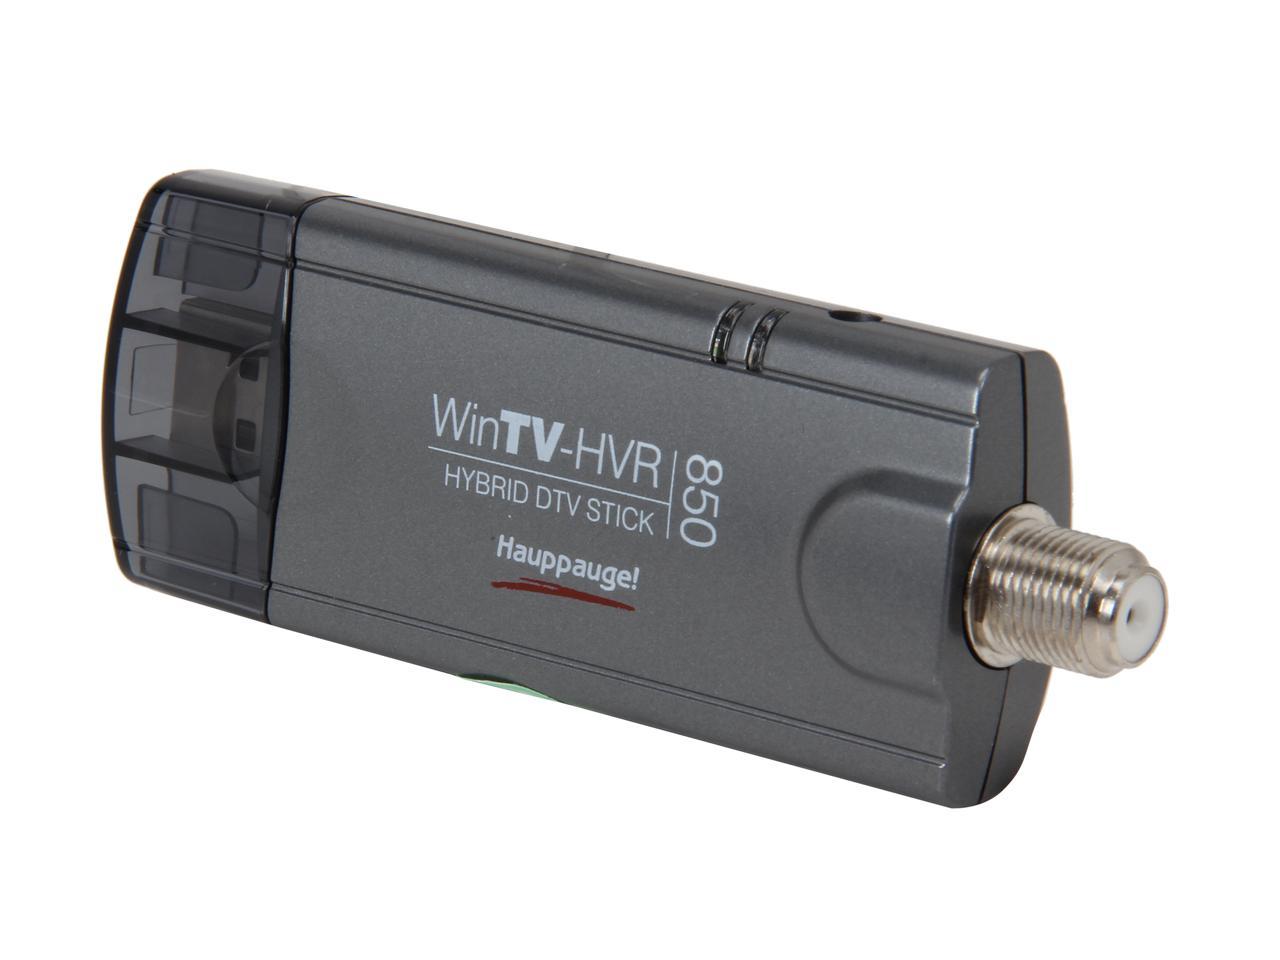 where to locate wintv hvr 850 product code